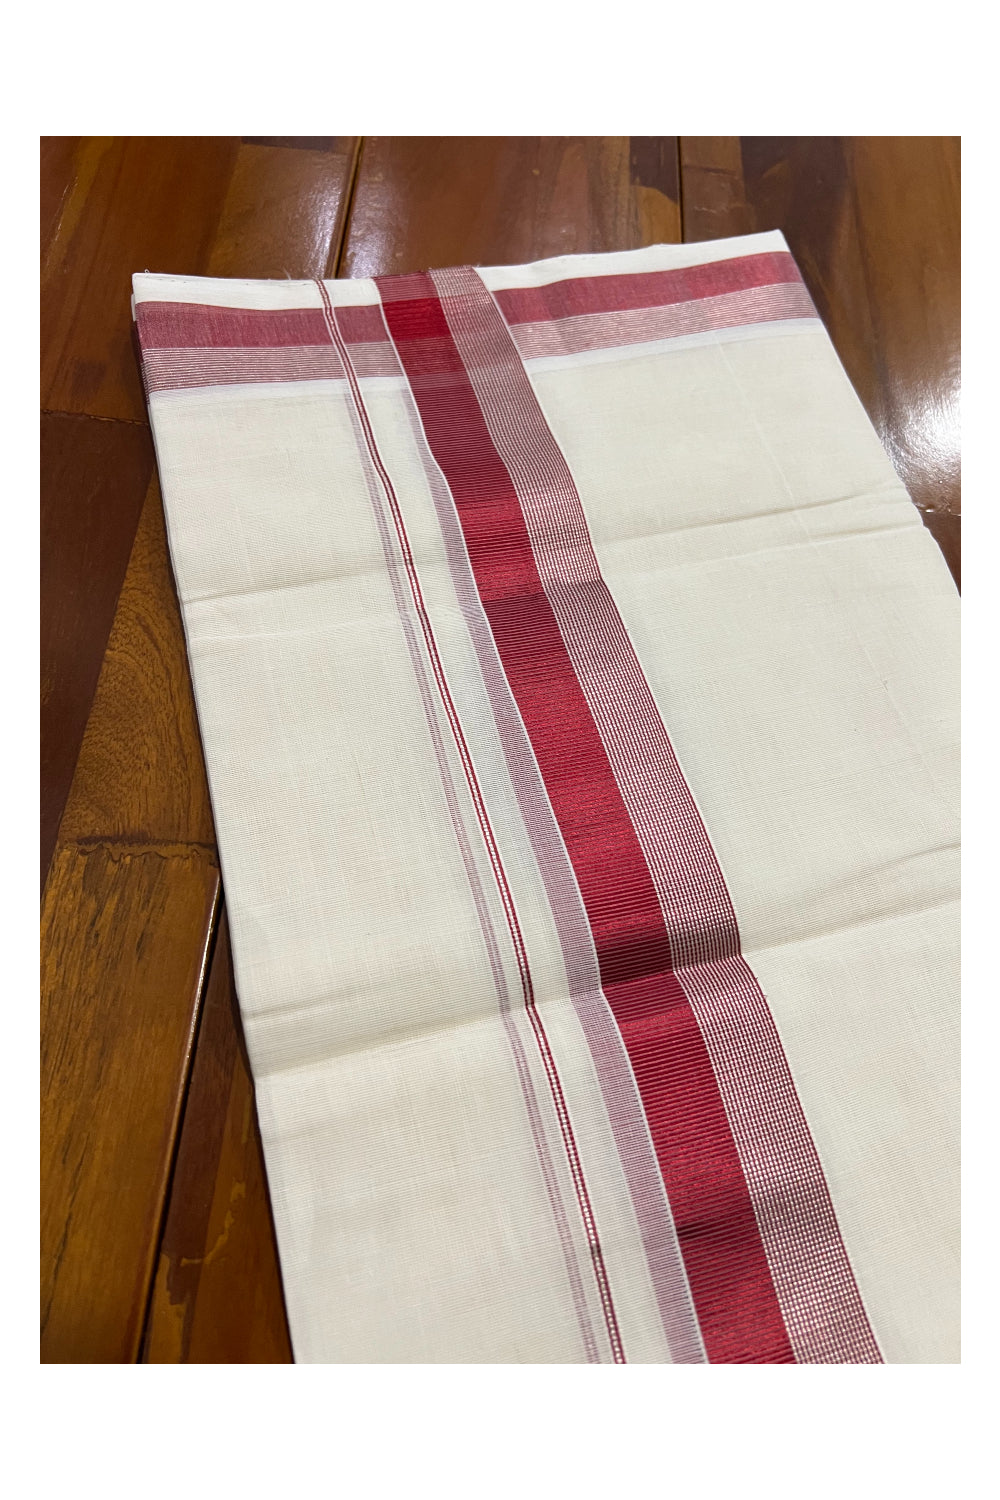 Southloom Kuthampully Handloom Pure Cotton Mundu with Silver and Dark Red Kasavu Border (South Indian Dhoti)